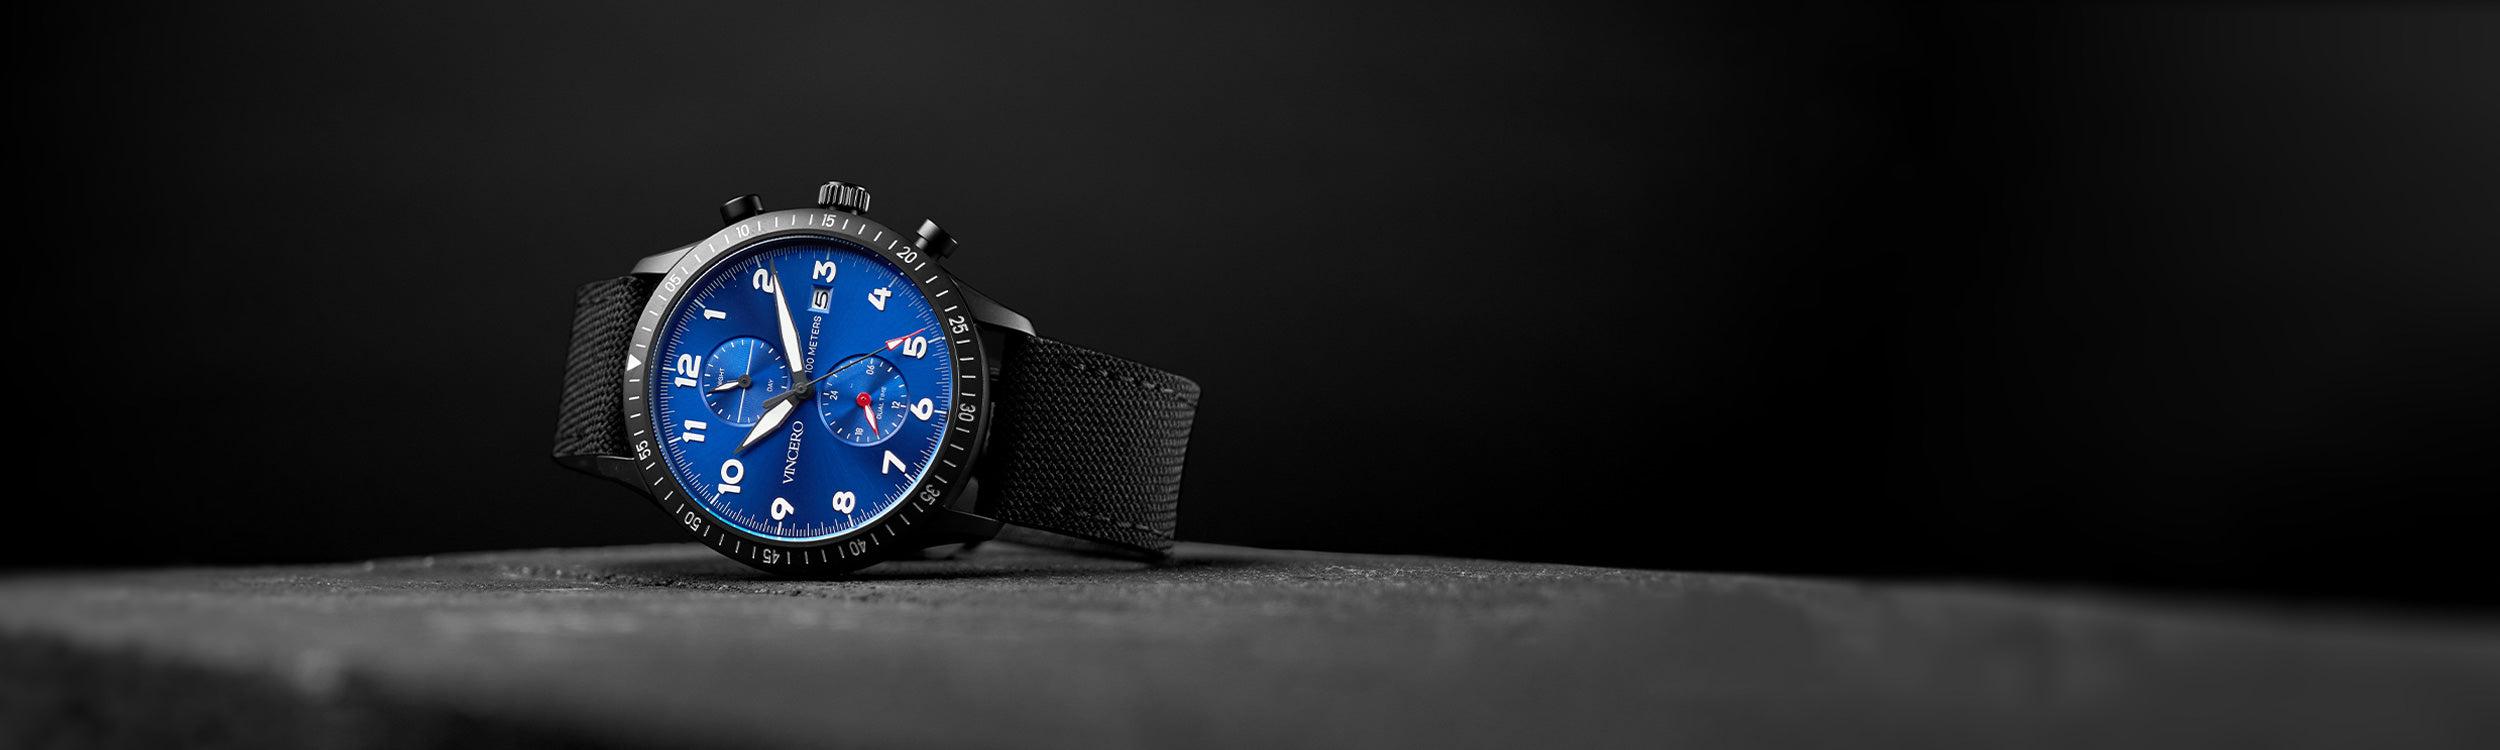 Black and blue watch in black background